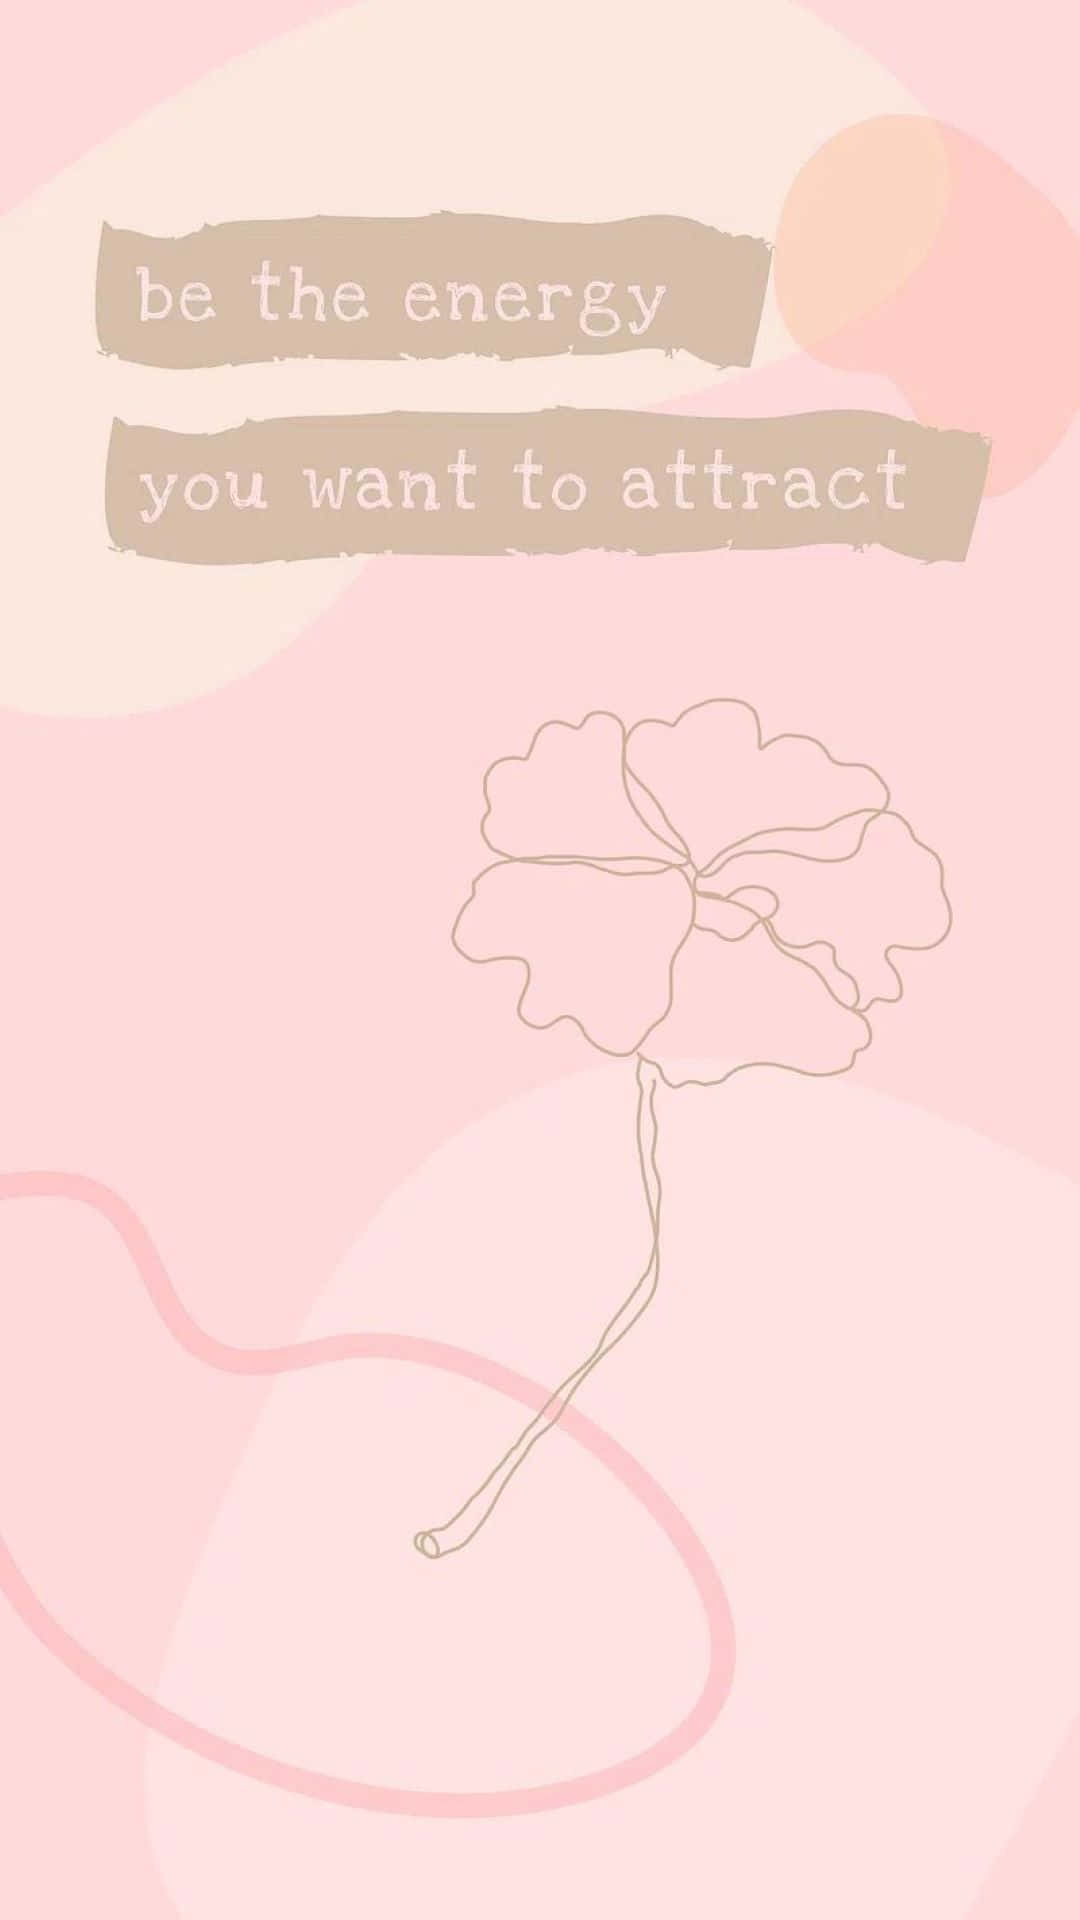 Energy Attraction Positive Quote Aesthetic.jpg Wallpaper